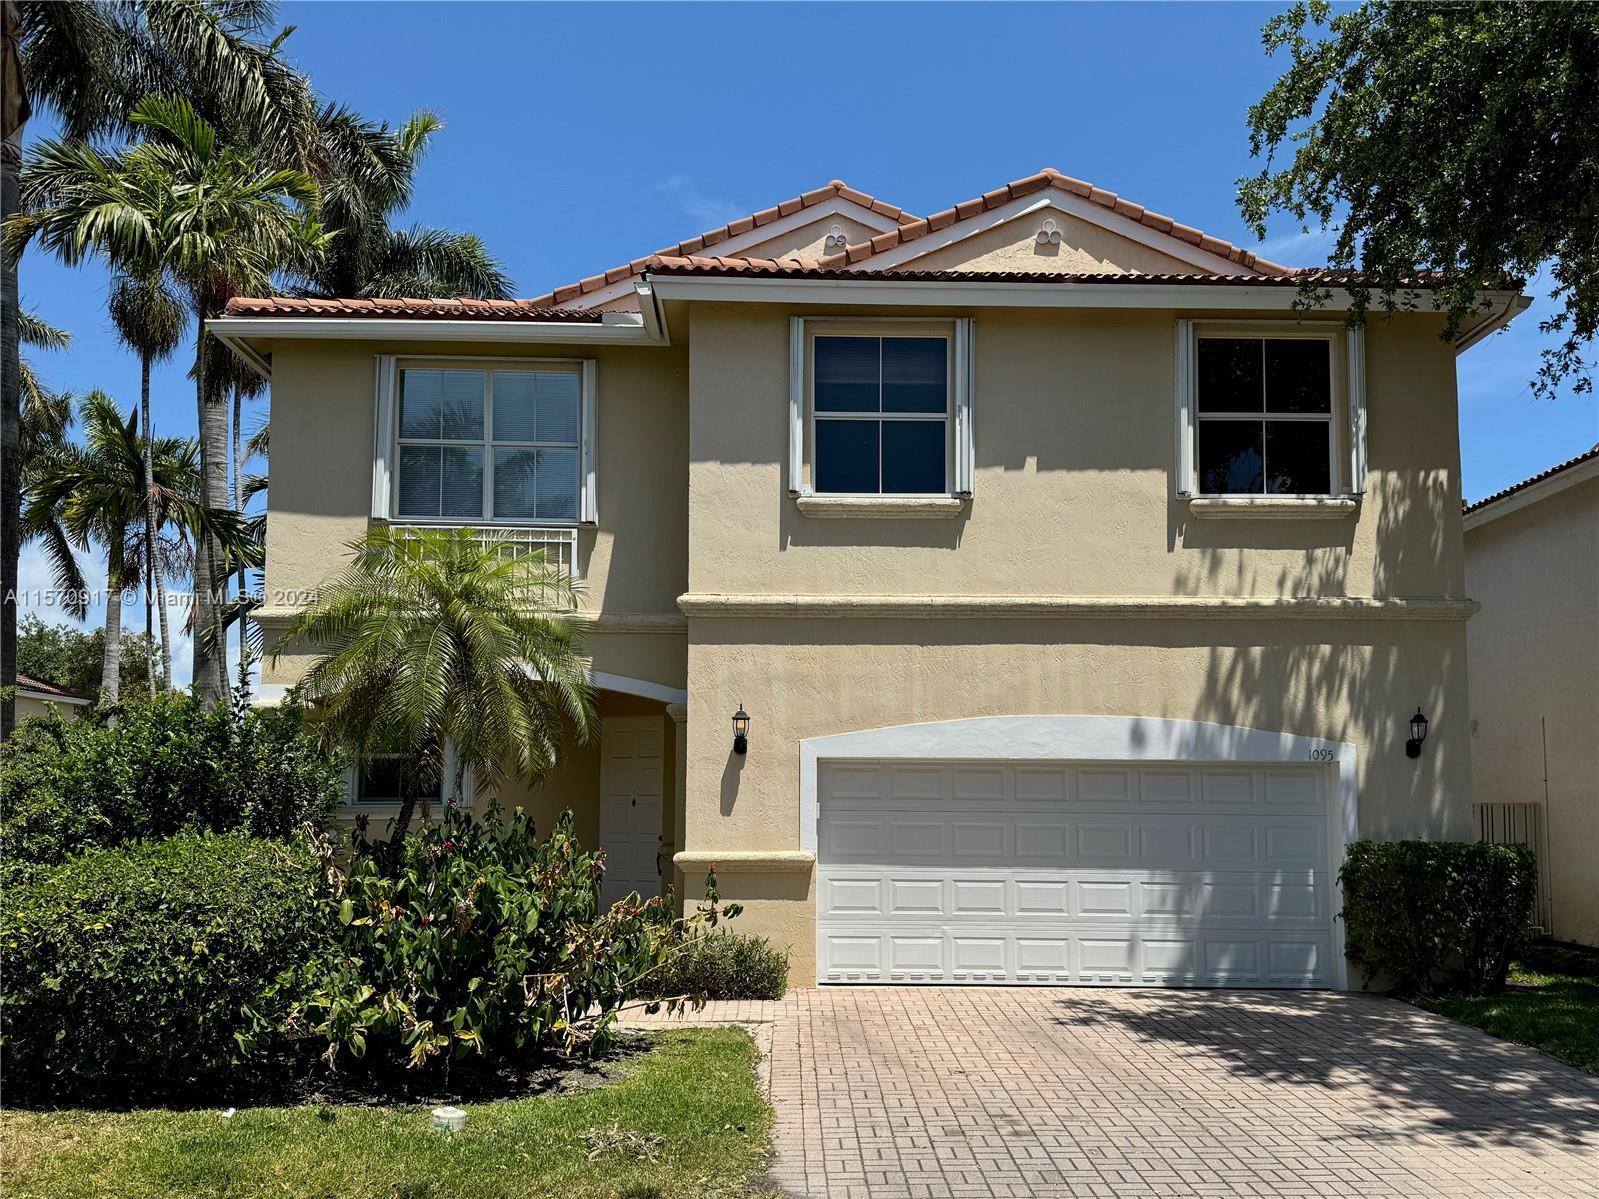 Looking for a large home in a gated community close to the beach? Look no further. This is the large